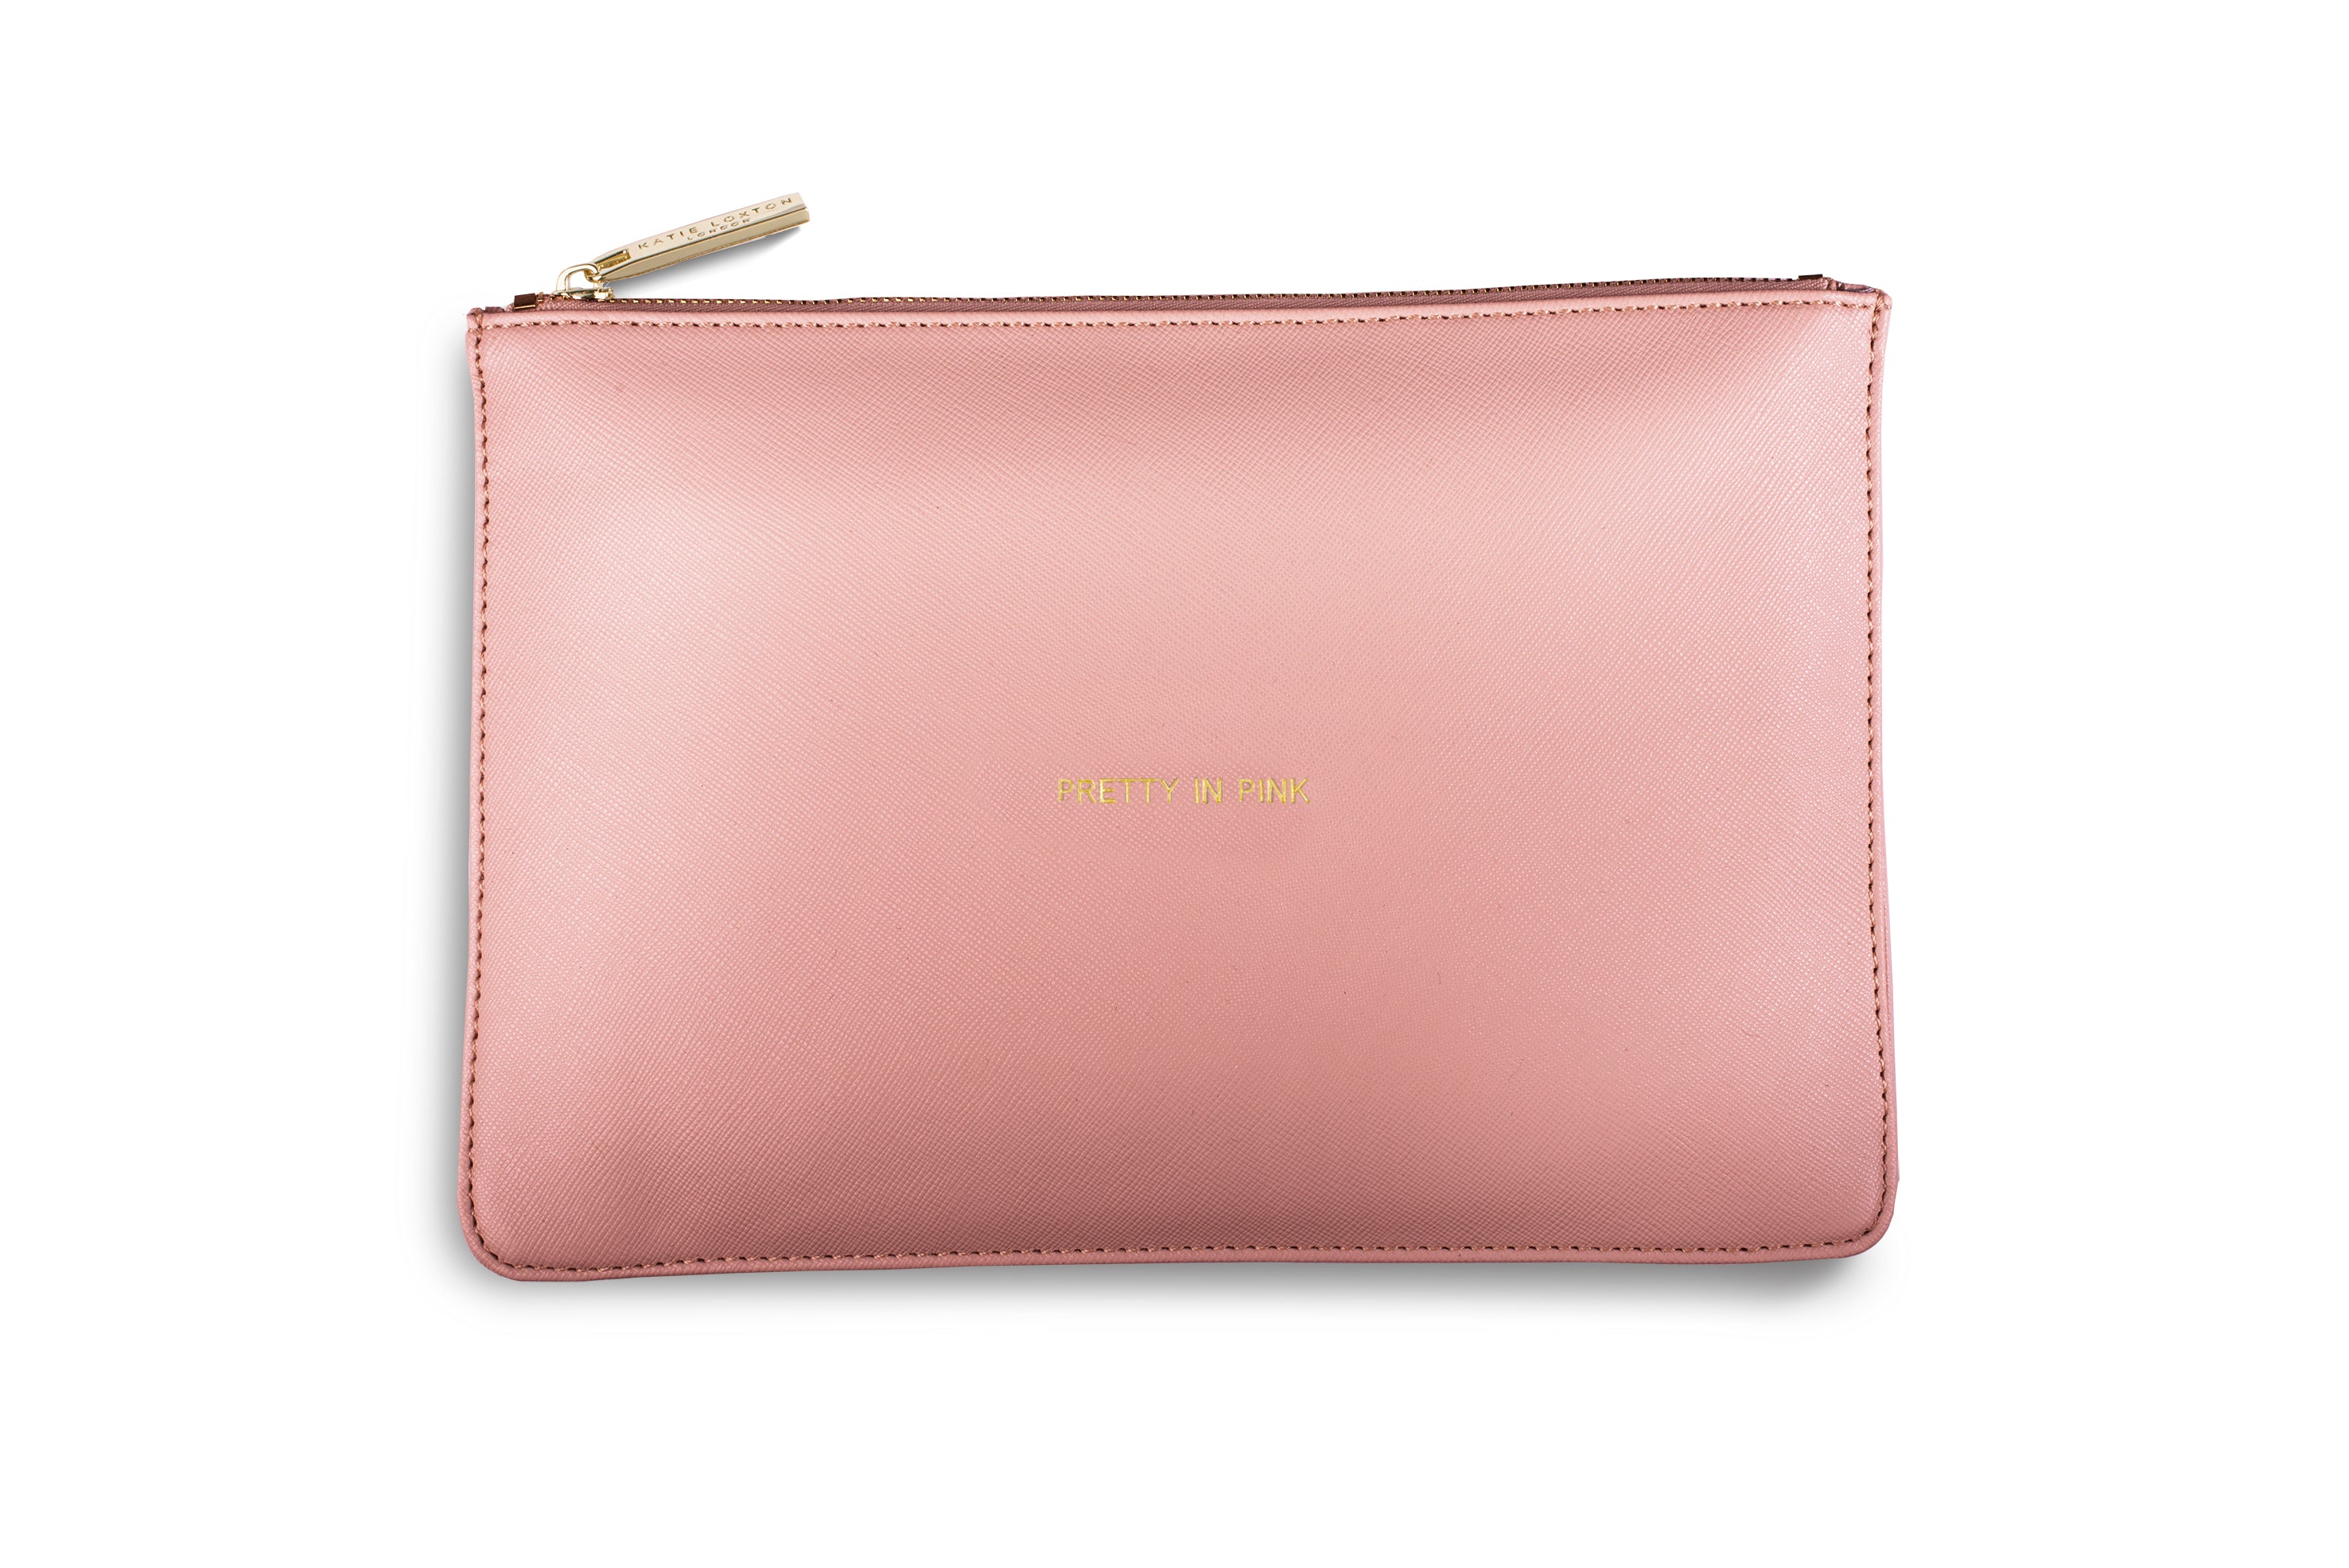 Perfect Pouch - Pretty In Pink Front View